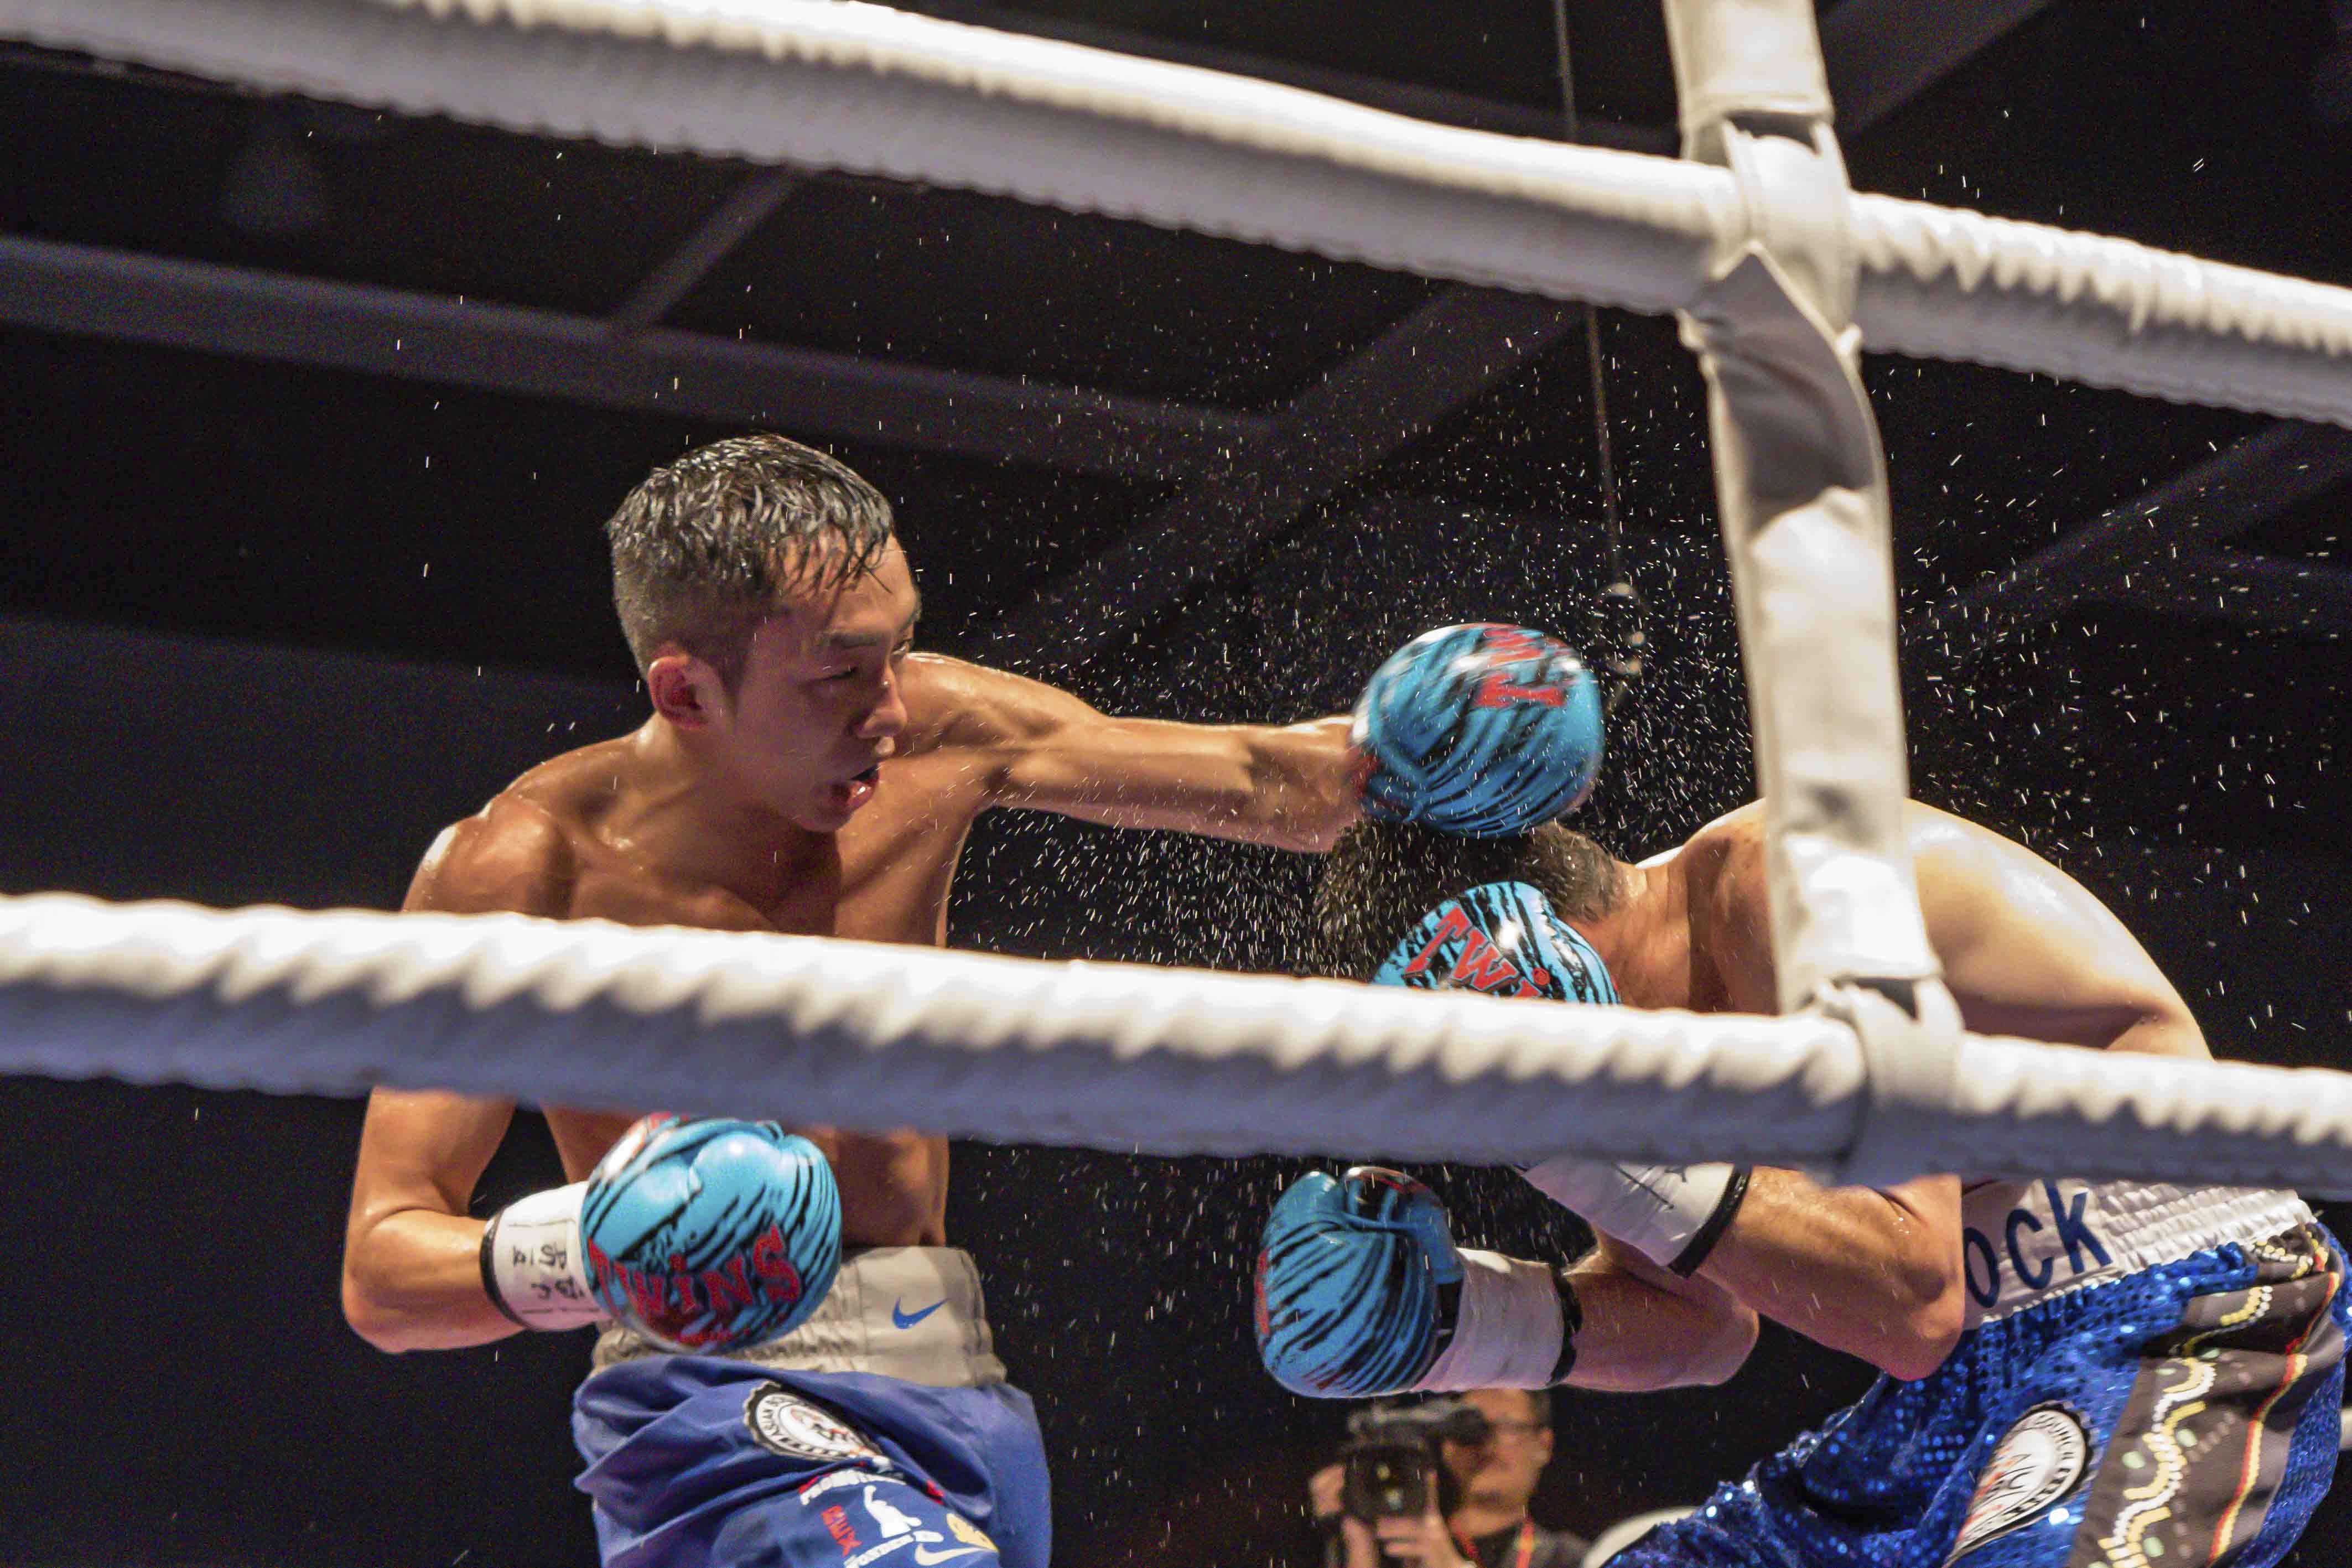 Rex Tso fights in May at the Hong Kong Converion and Exhibition Centre.